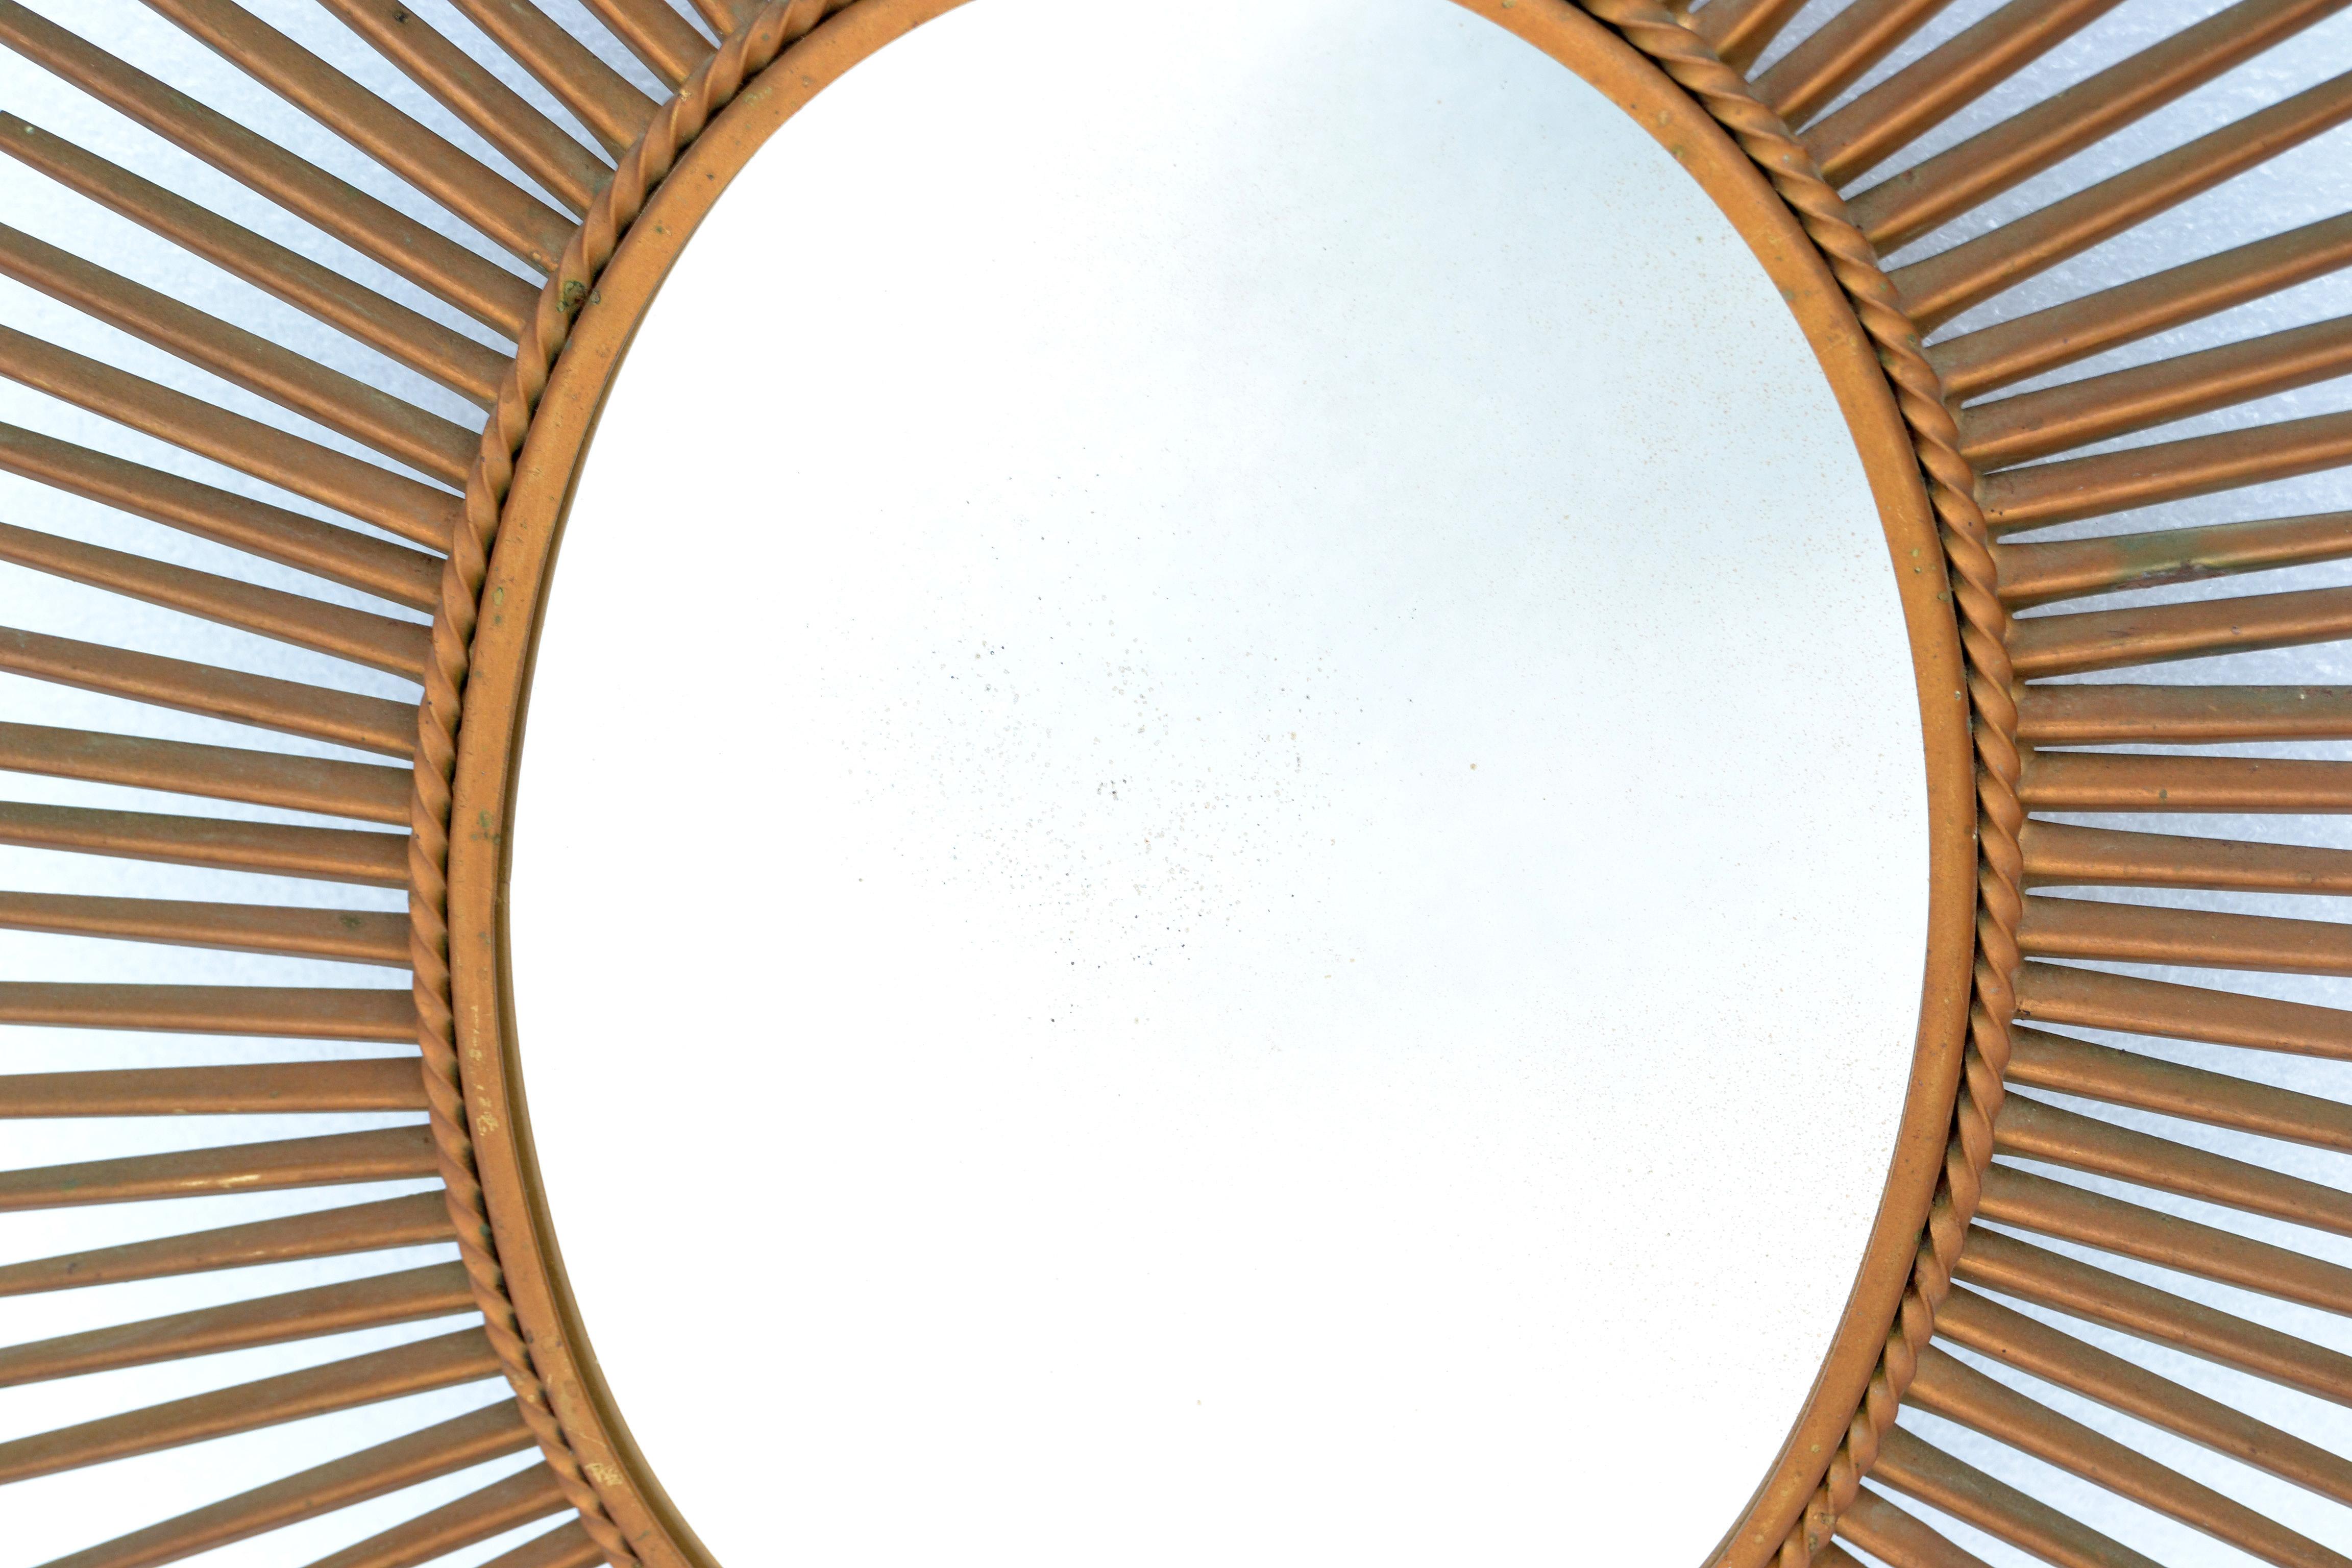 Chaty Vallauris Oval Metal Sunburst Wall Mirror Gold Finish France, 1970 For Sale 2